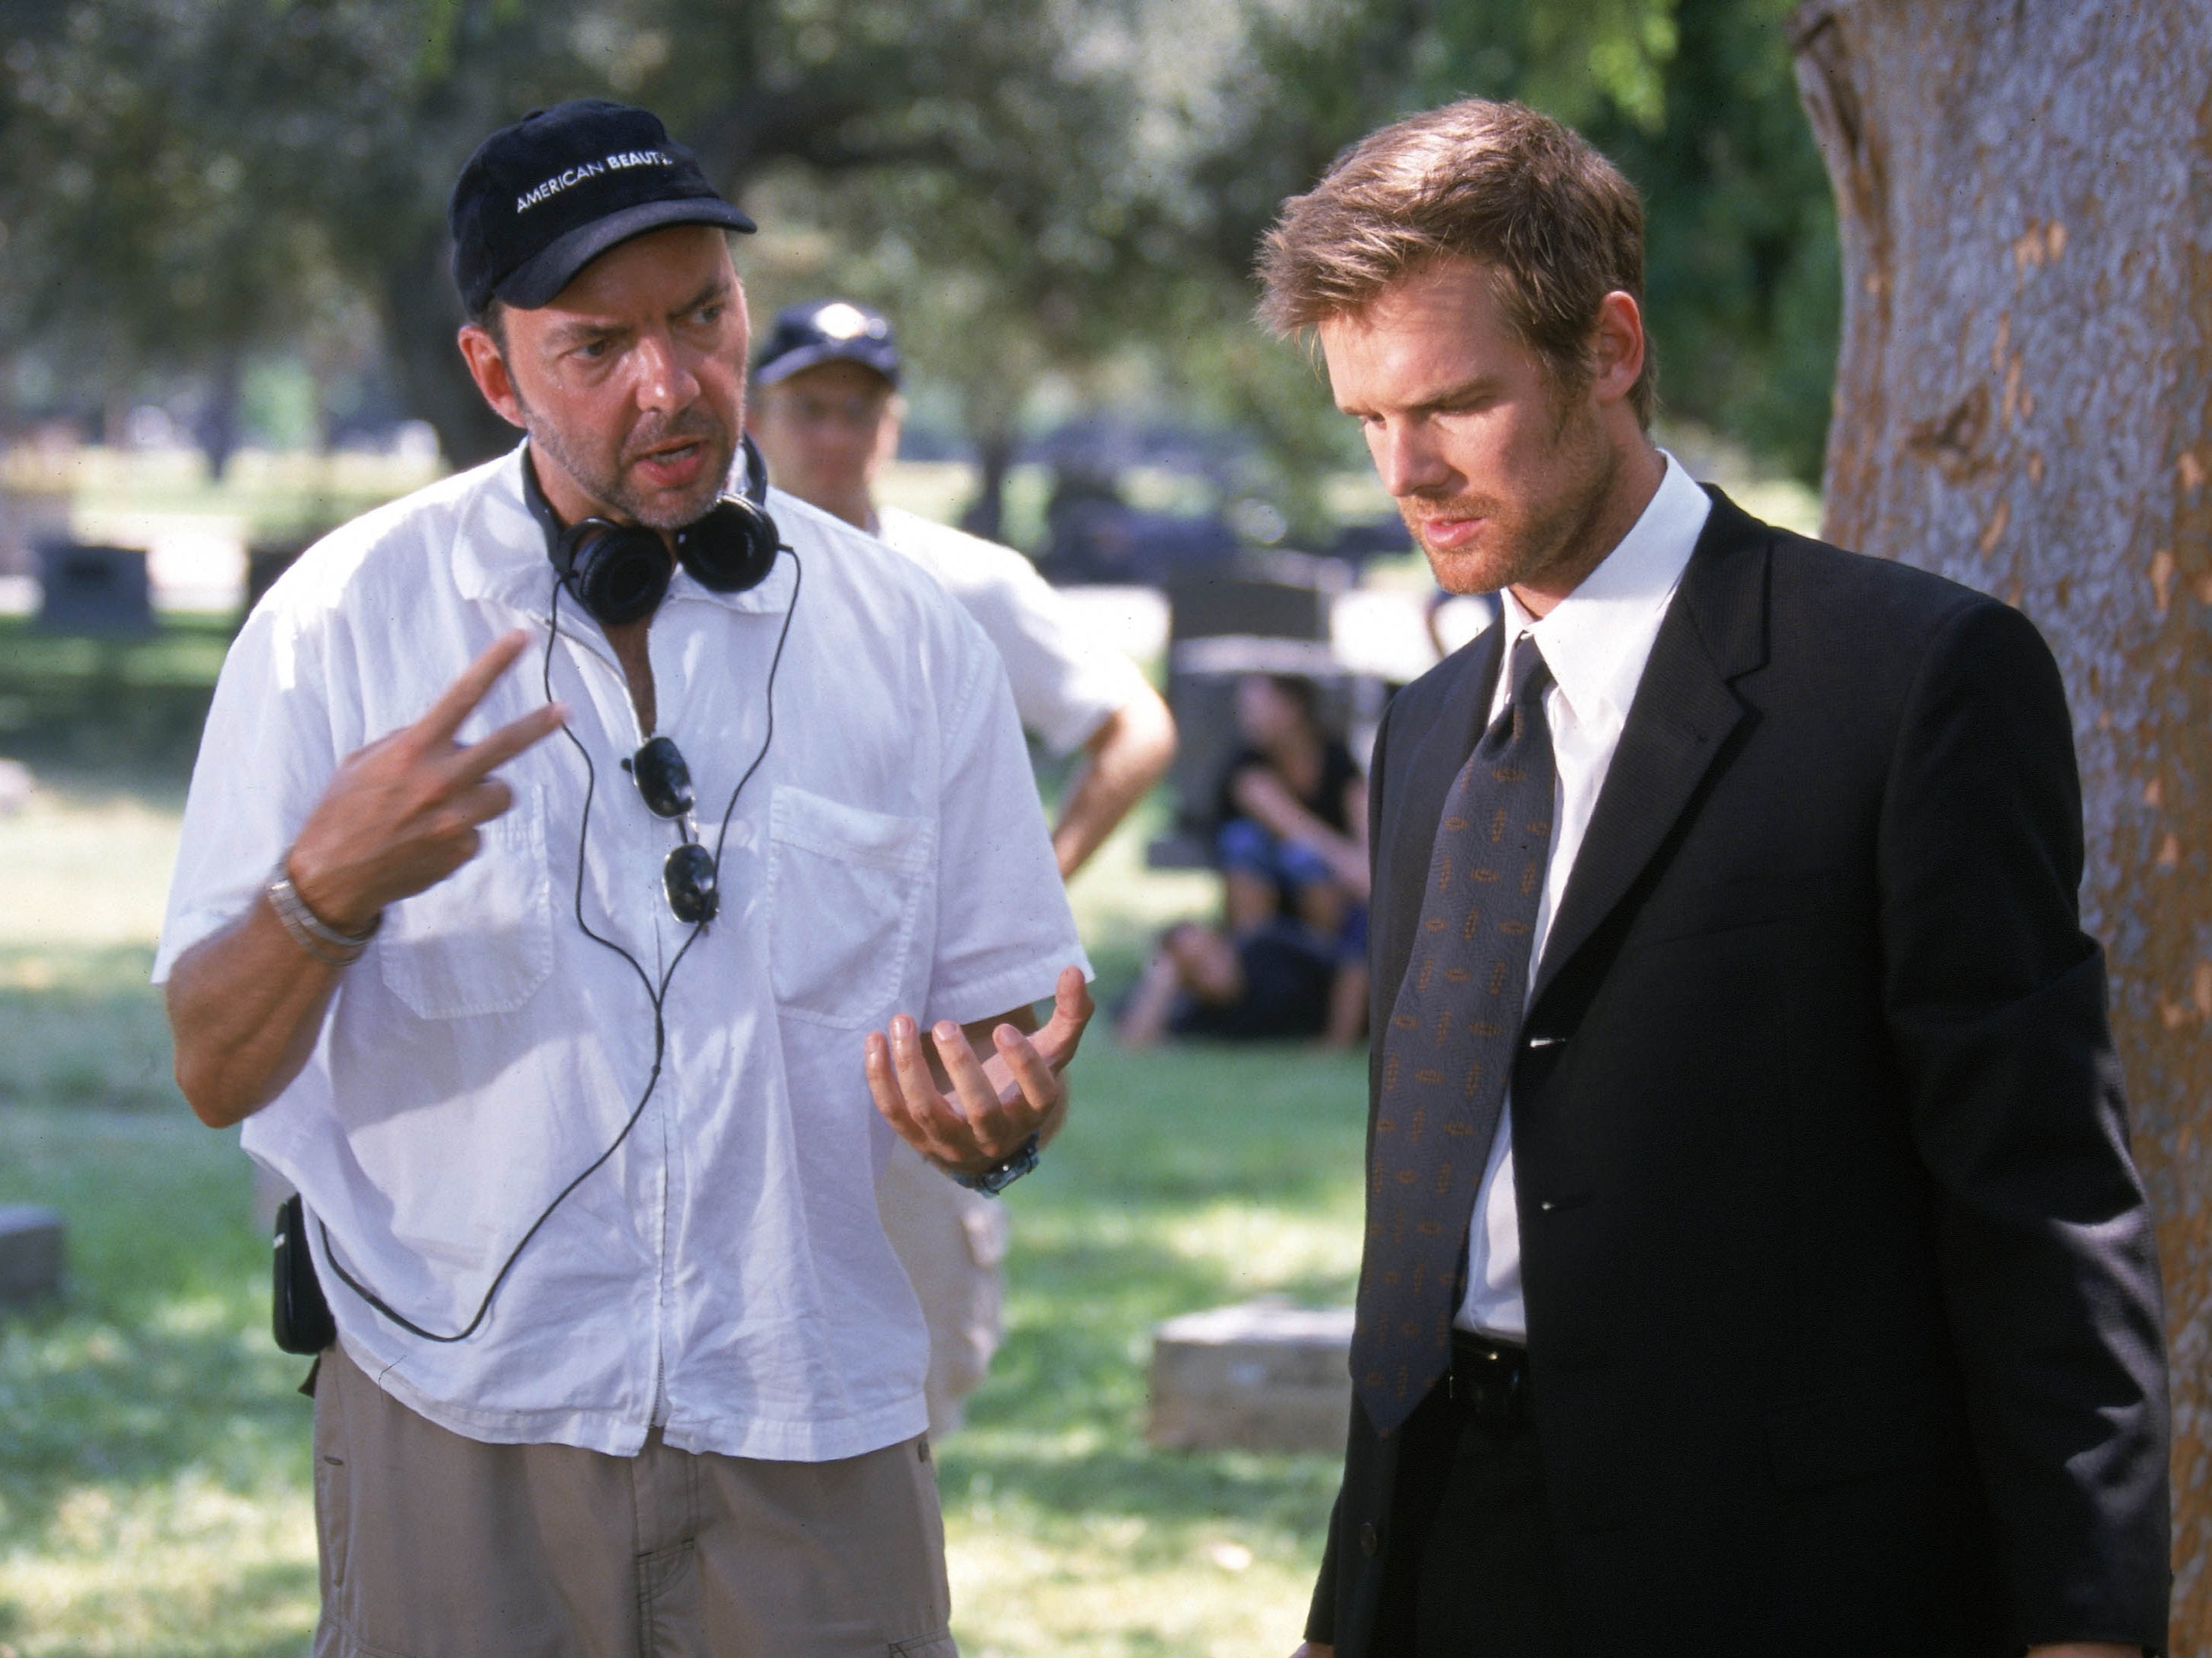 Alan Ball directing Peter Krause, while filming the pilot episode of ‘Six Feet Under’